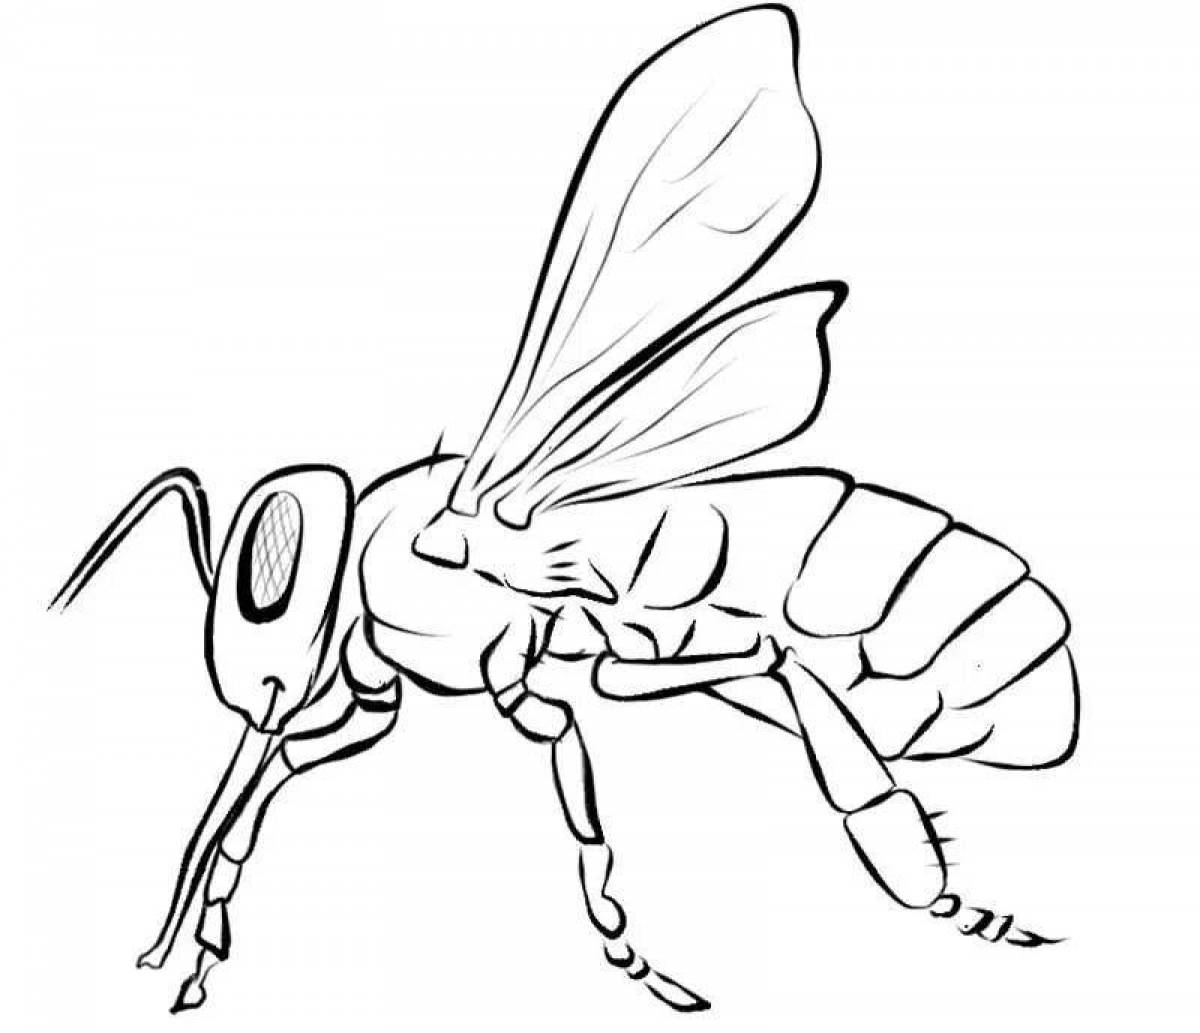 Unique wasp coloring page for kids